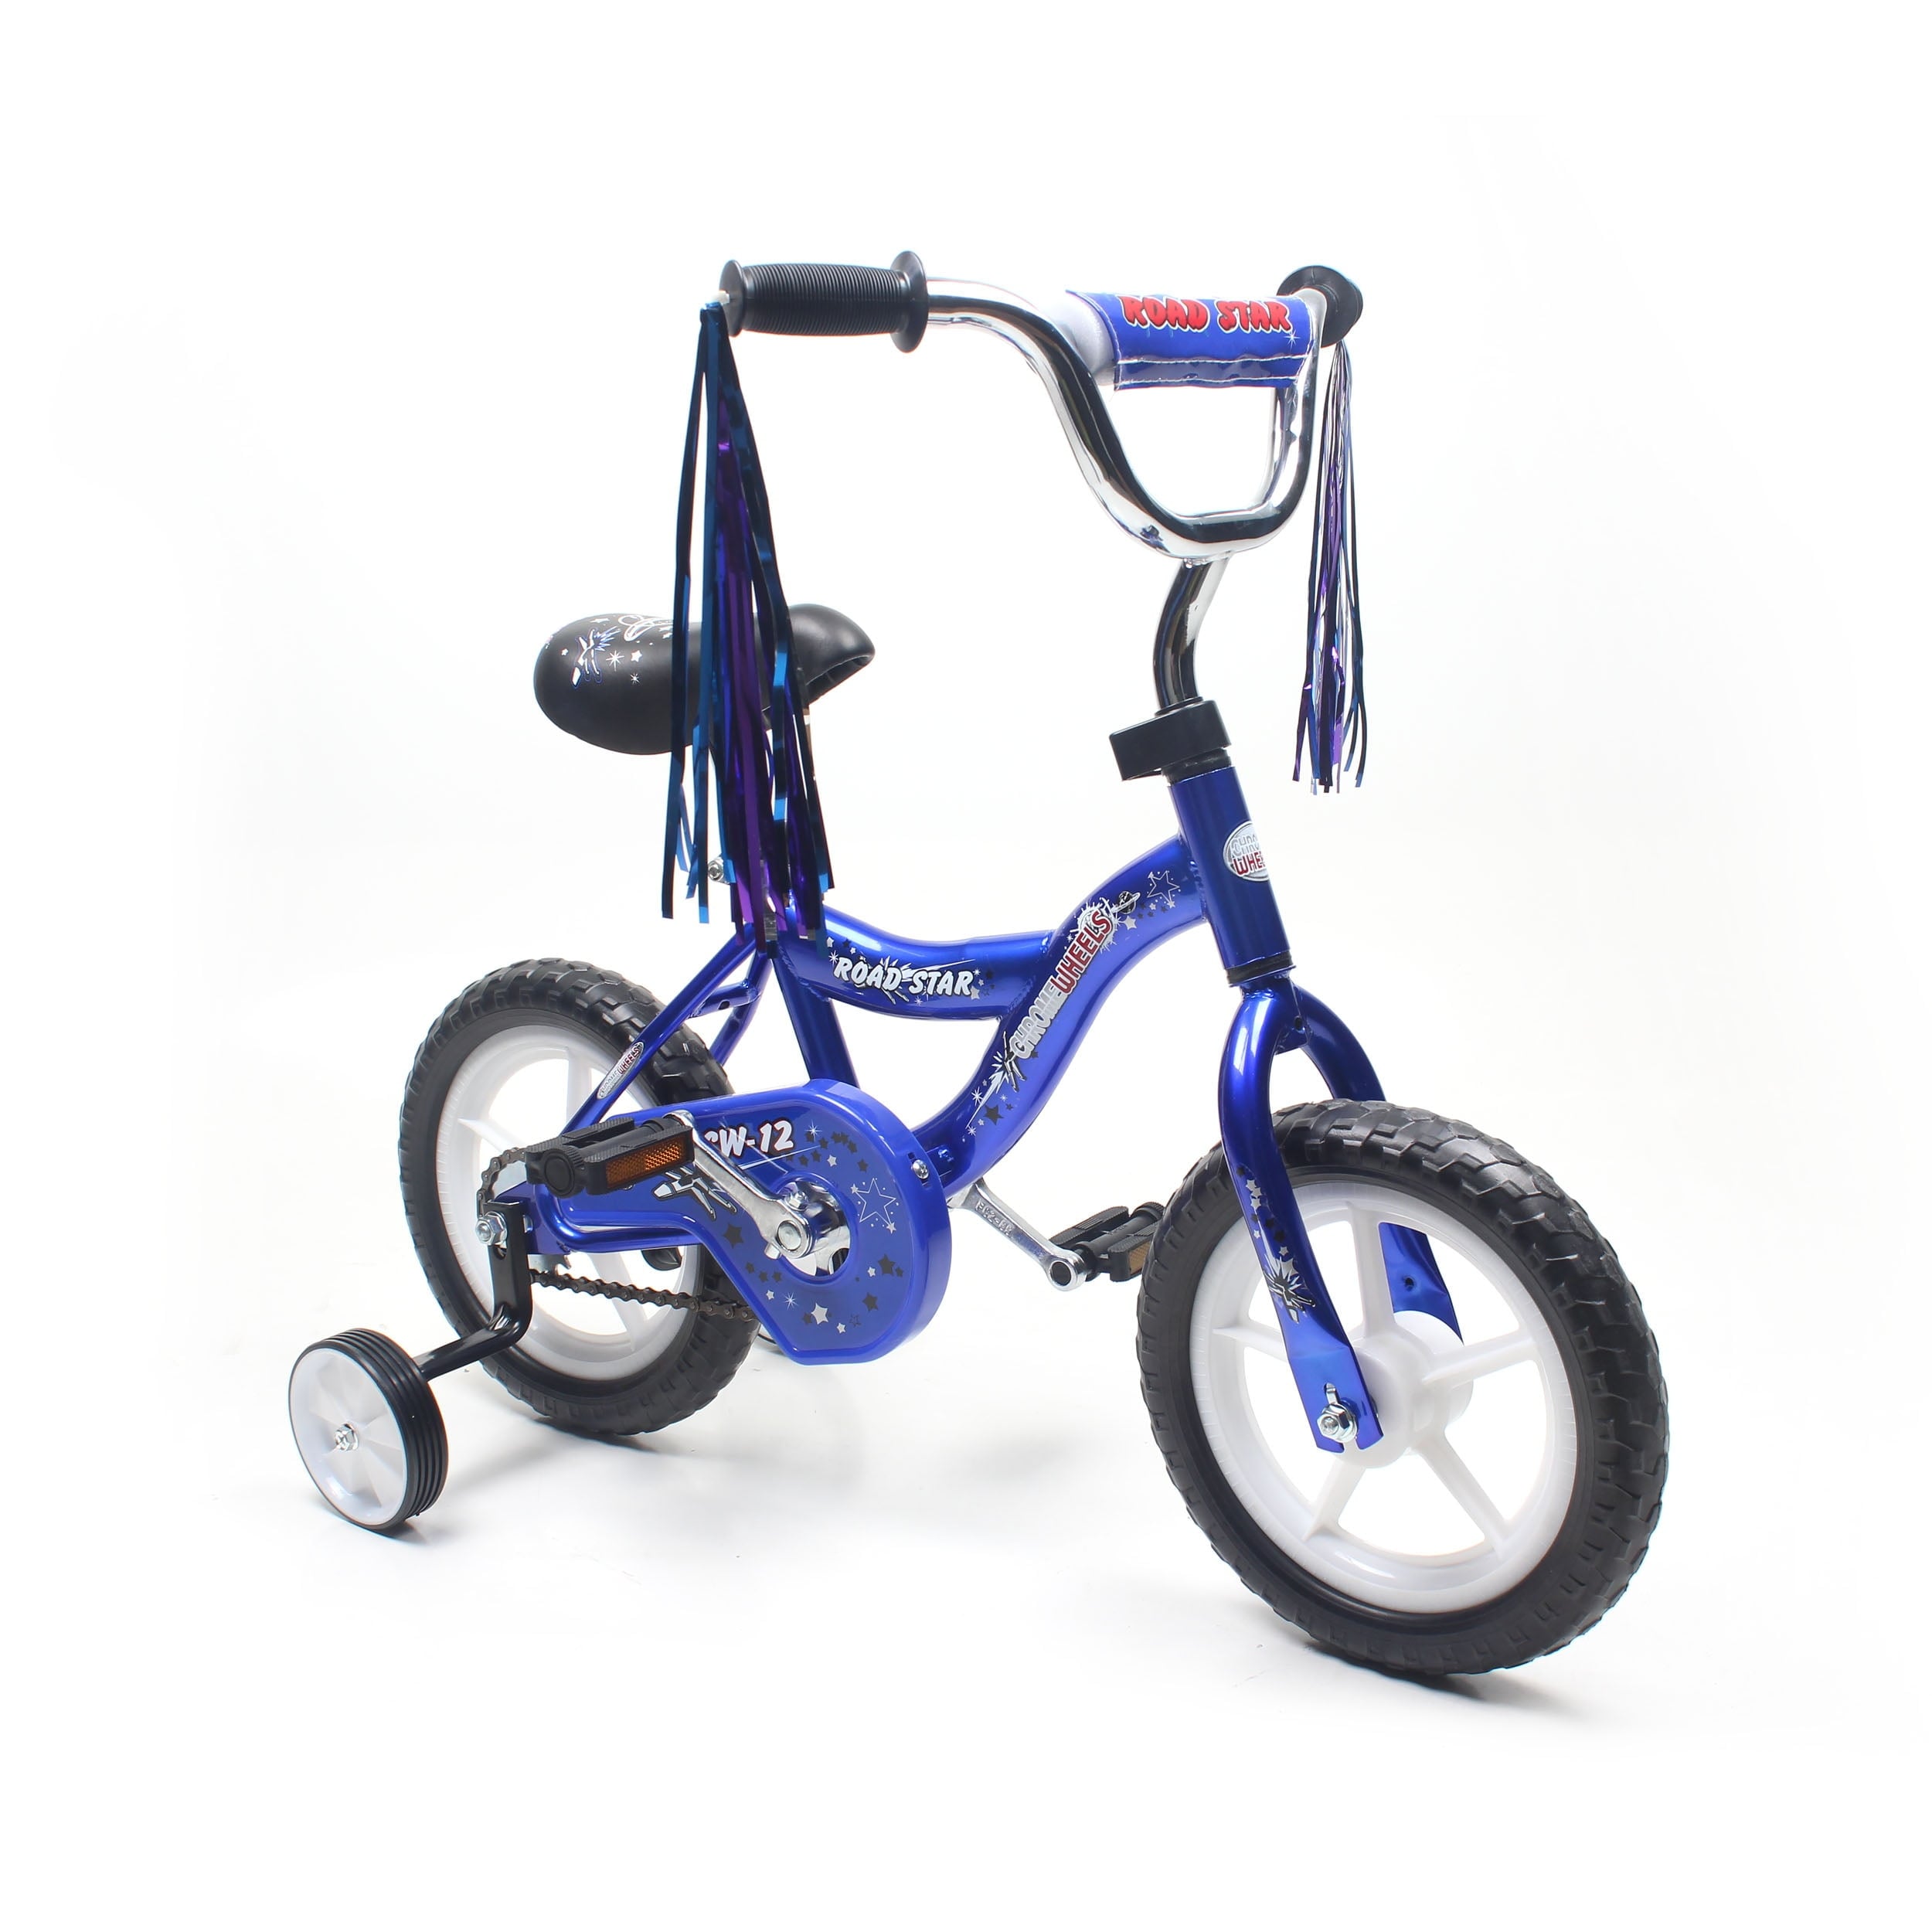 Kid's Bike for 2-4 Years Old, Bicycle for Girls with Front Basket, EVA Tires